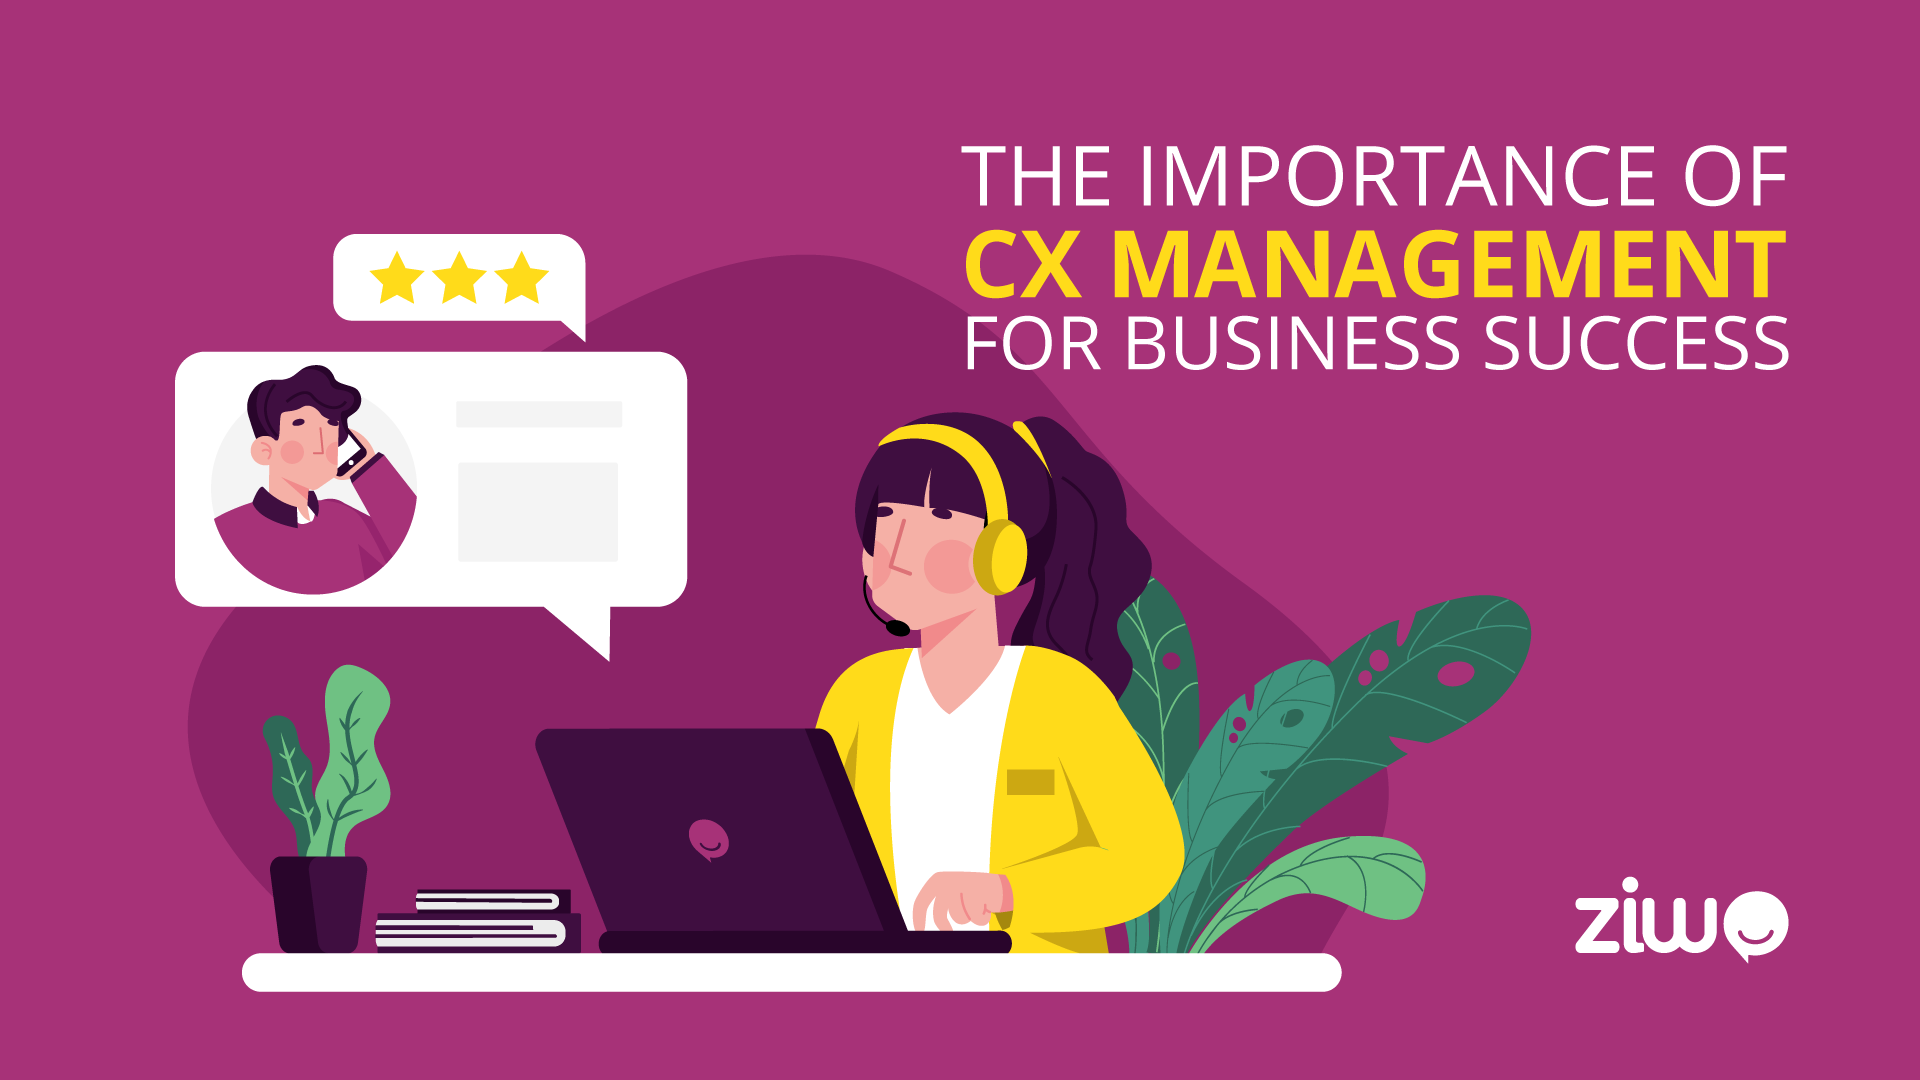 The importance of CX management for business success